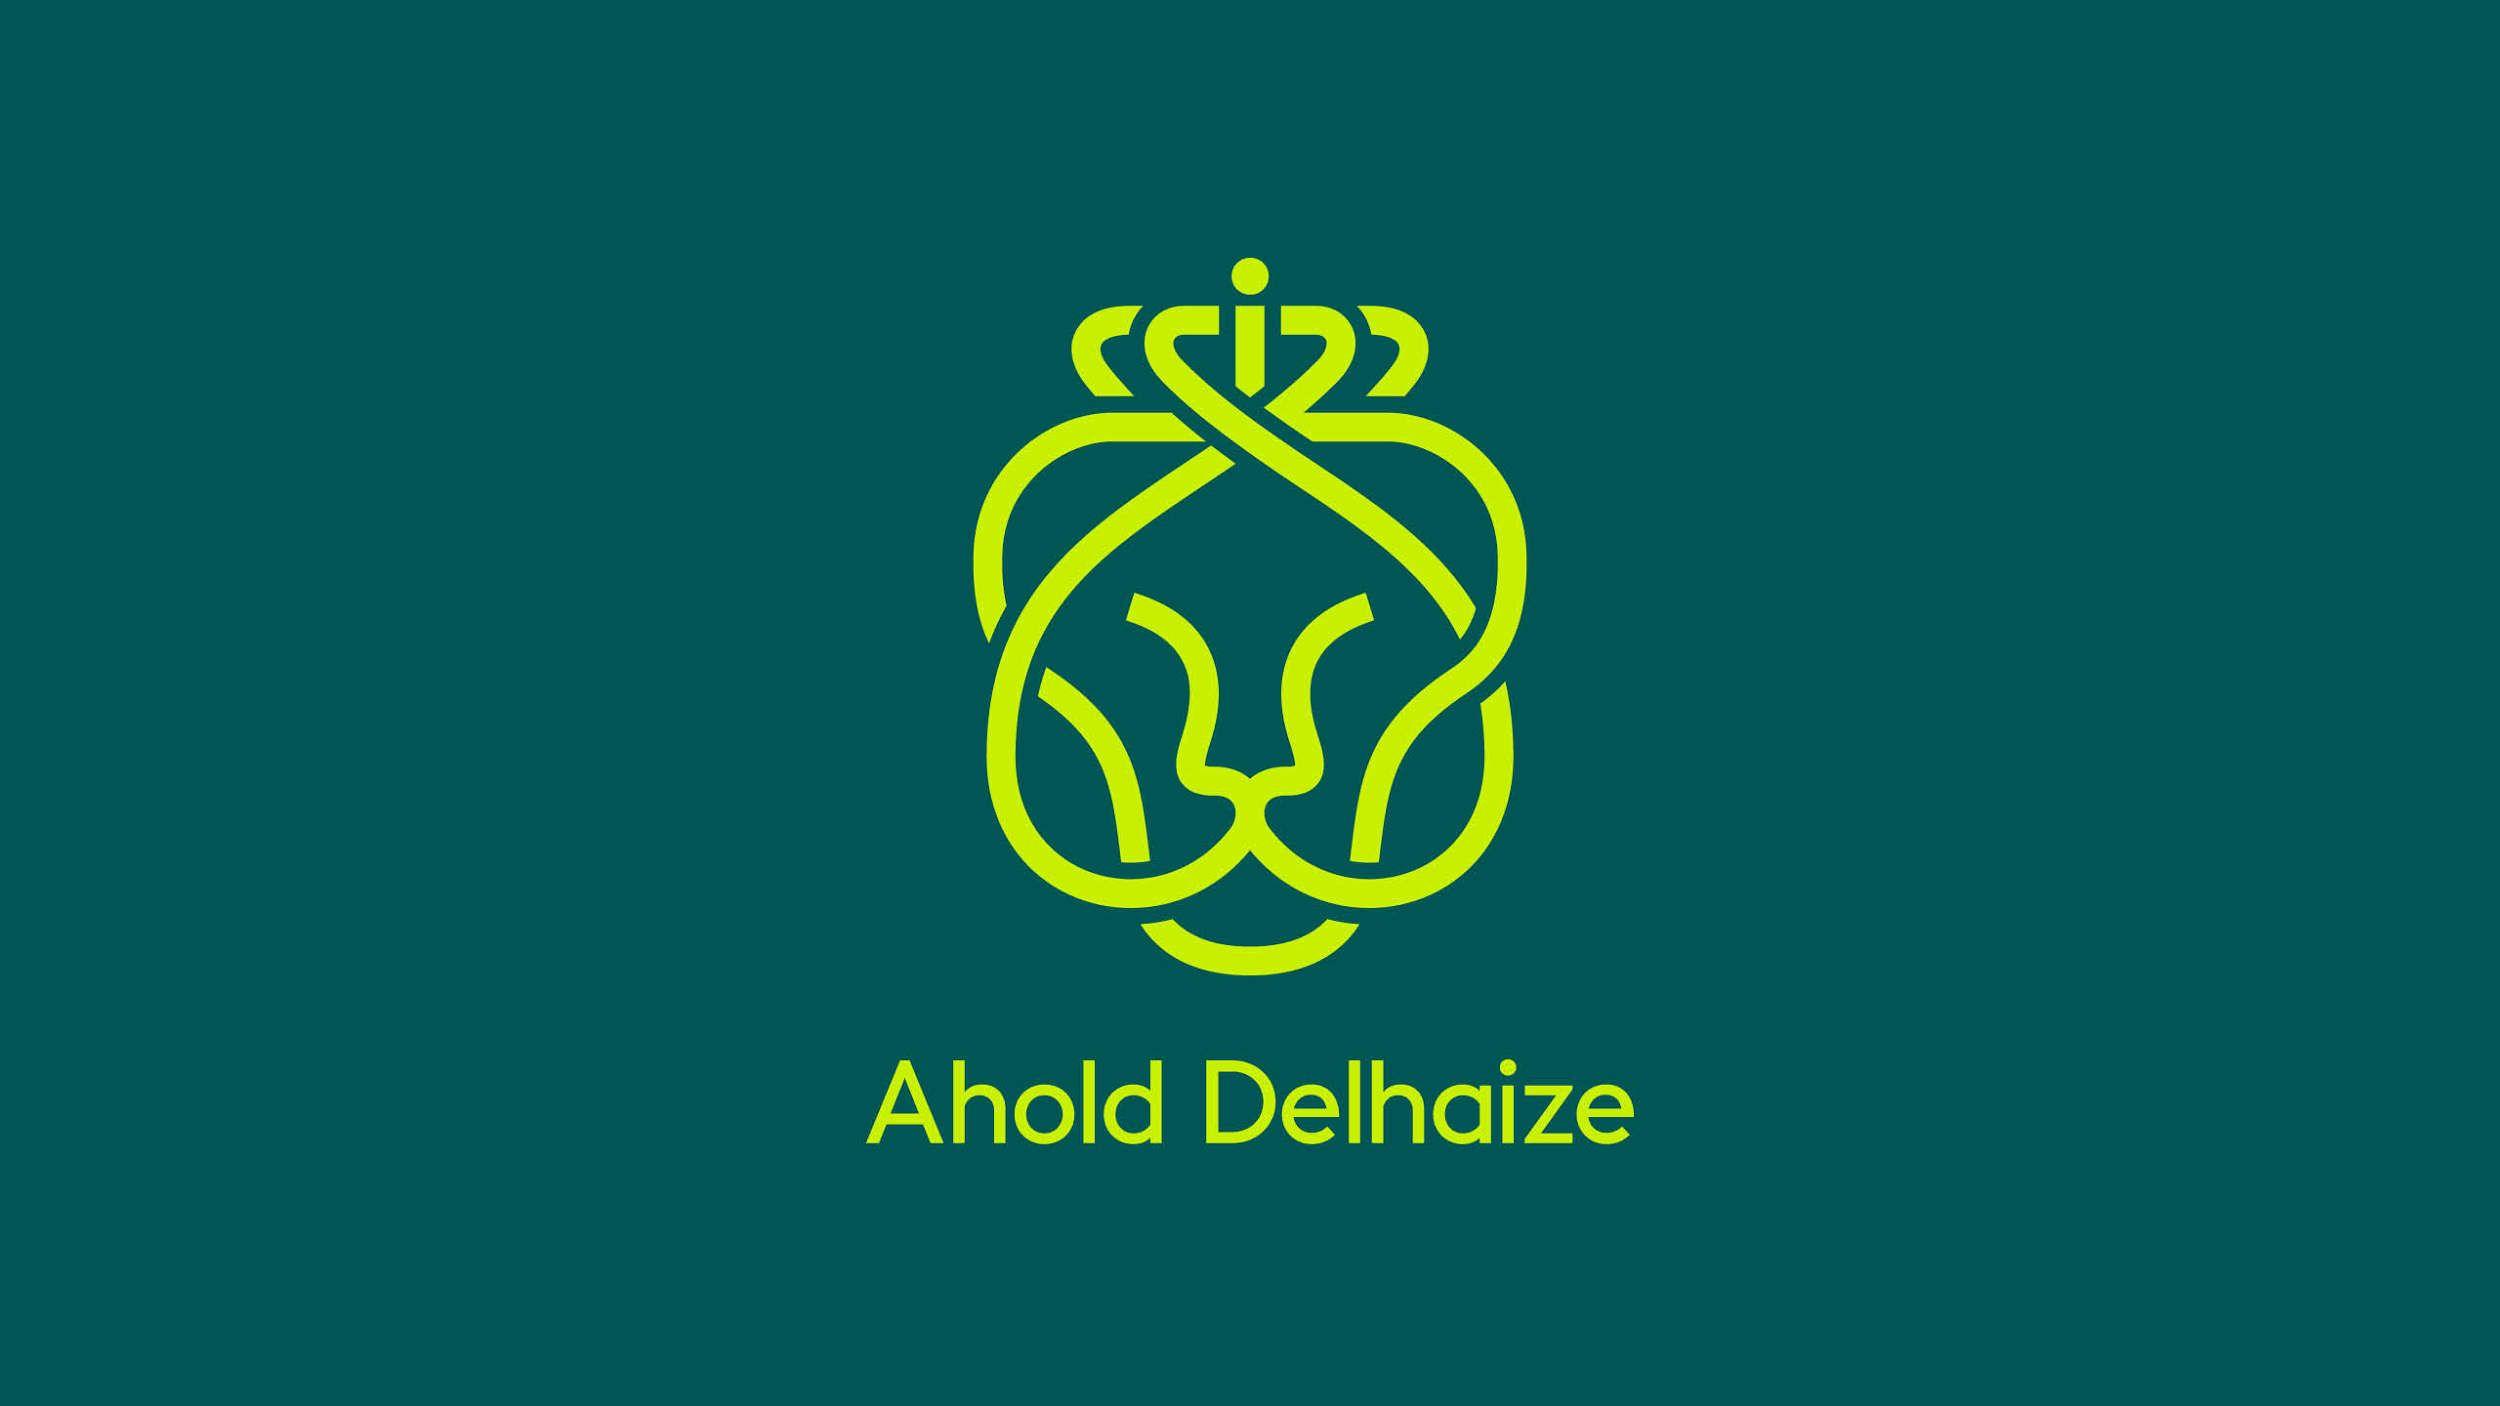 Delhaize Ahold Logo - Ahold Delhaize - Made by Vinay